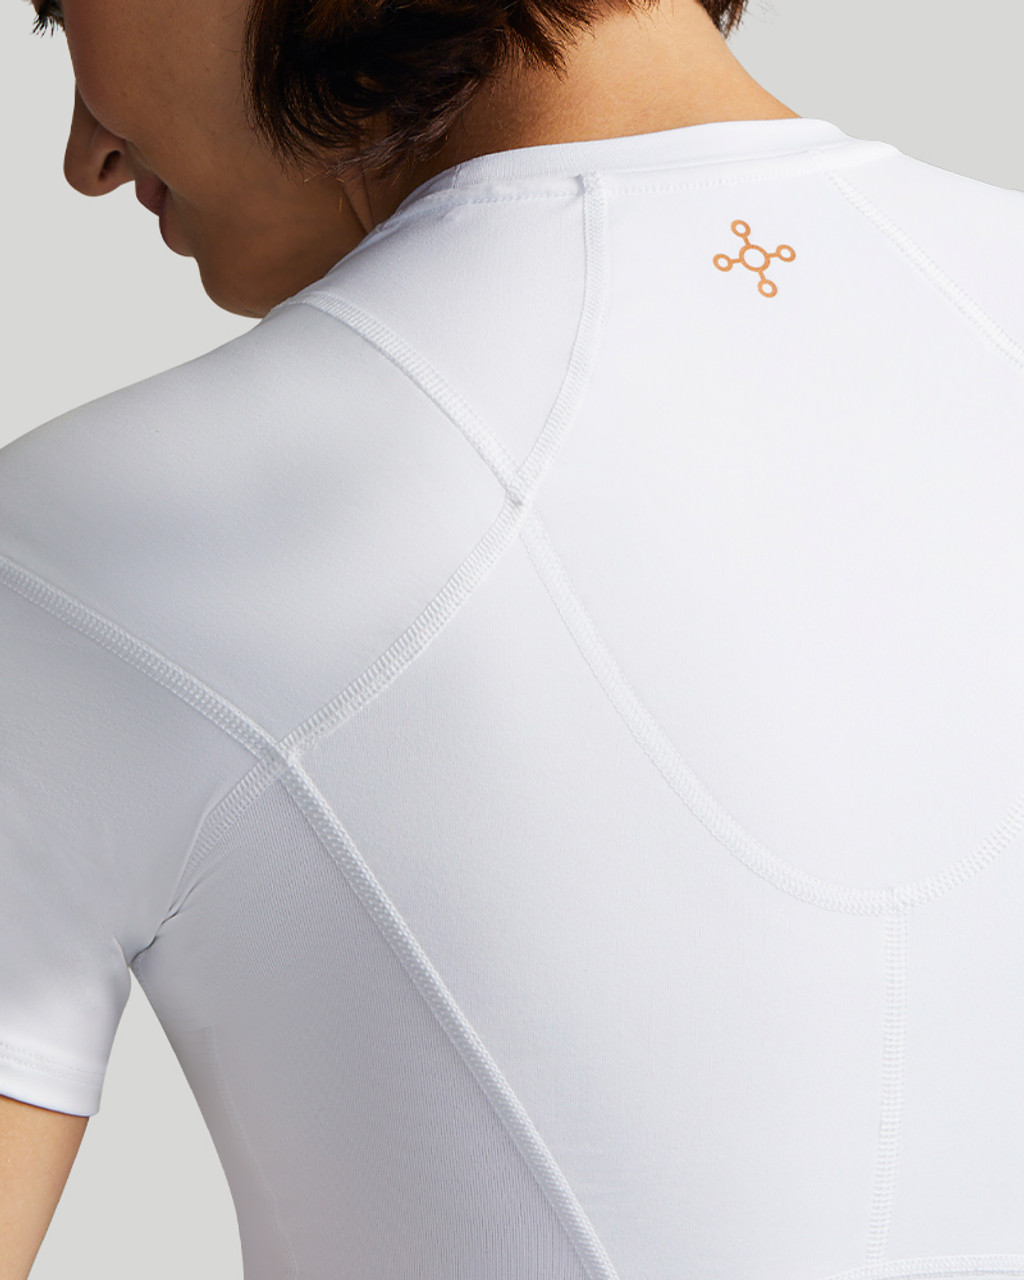 Posture Corrector Shirt  Shop Now at Tommie Copper®